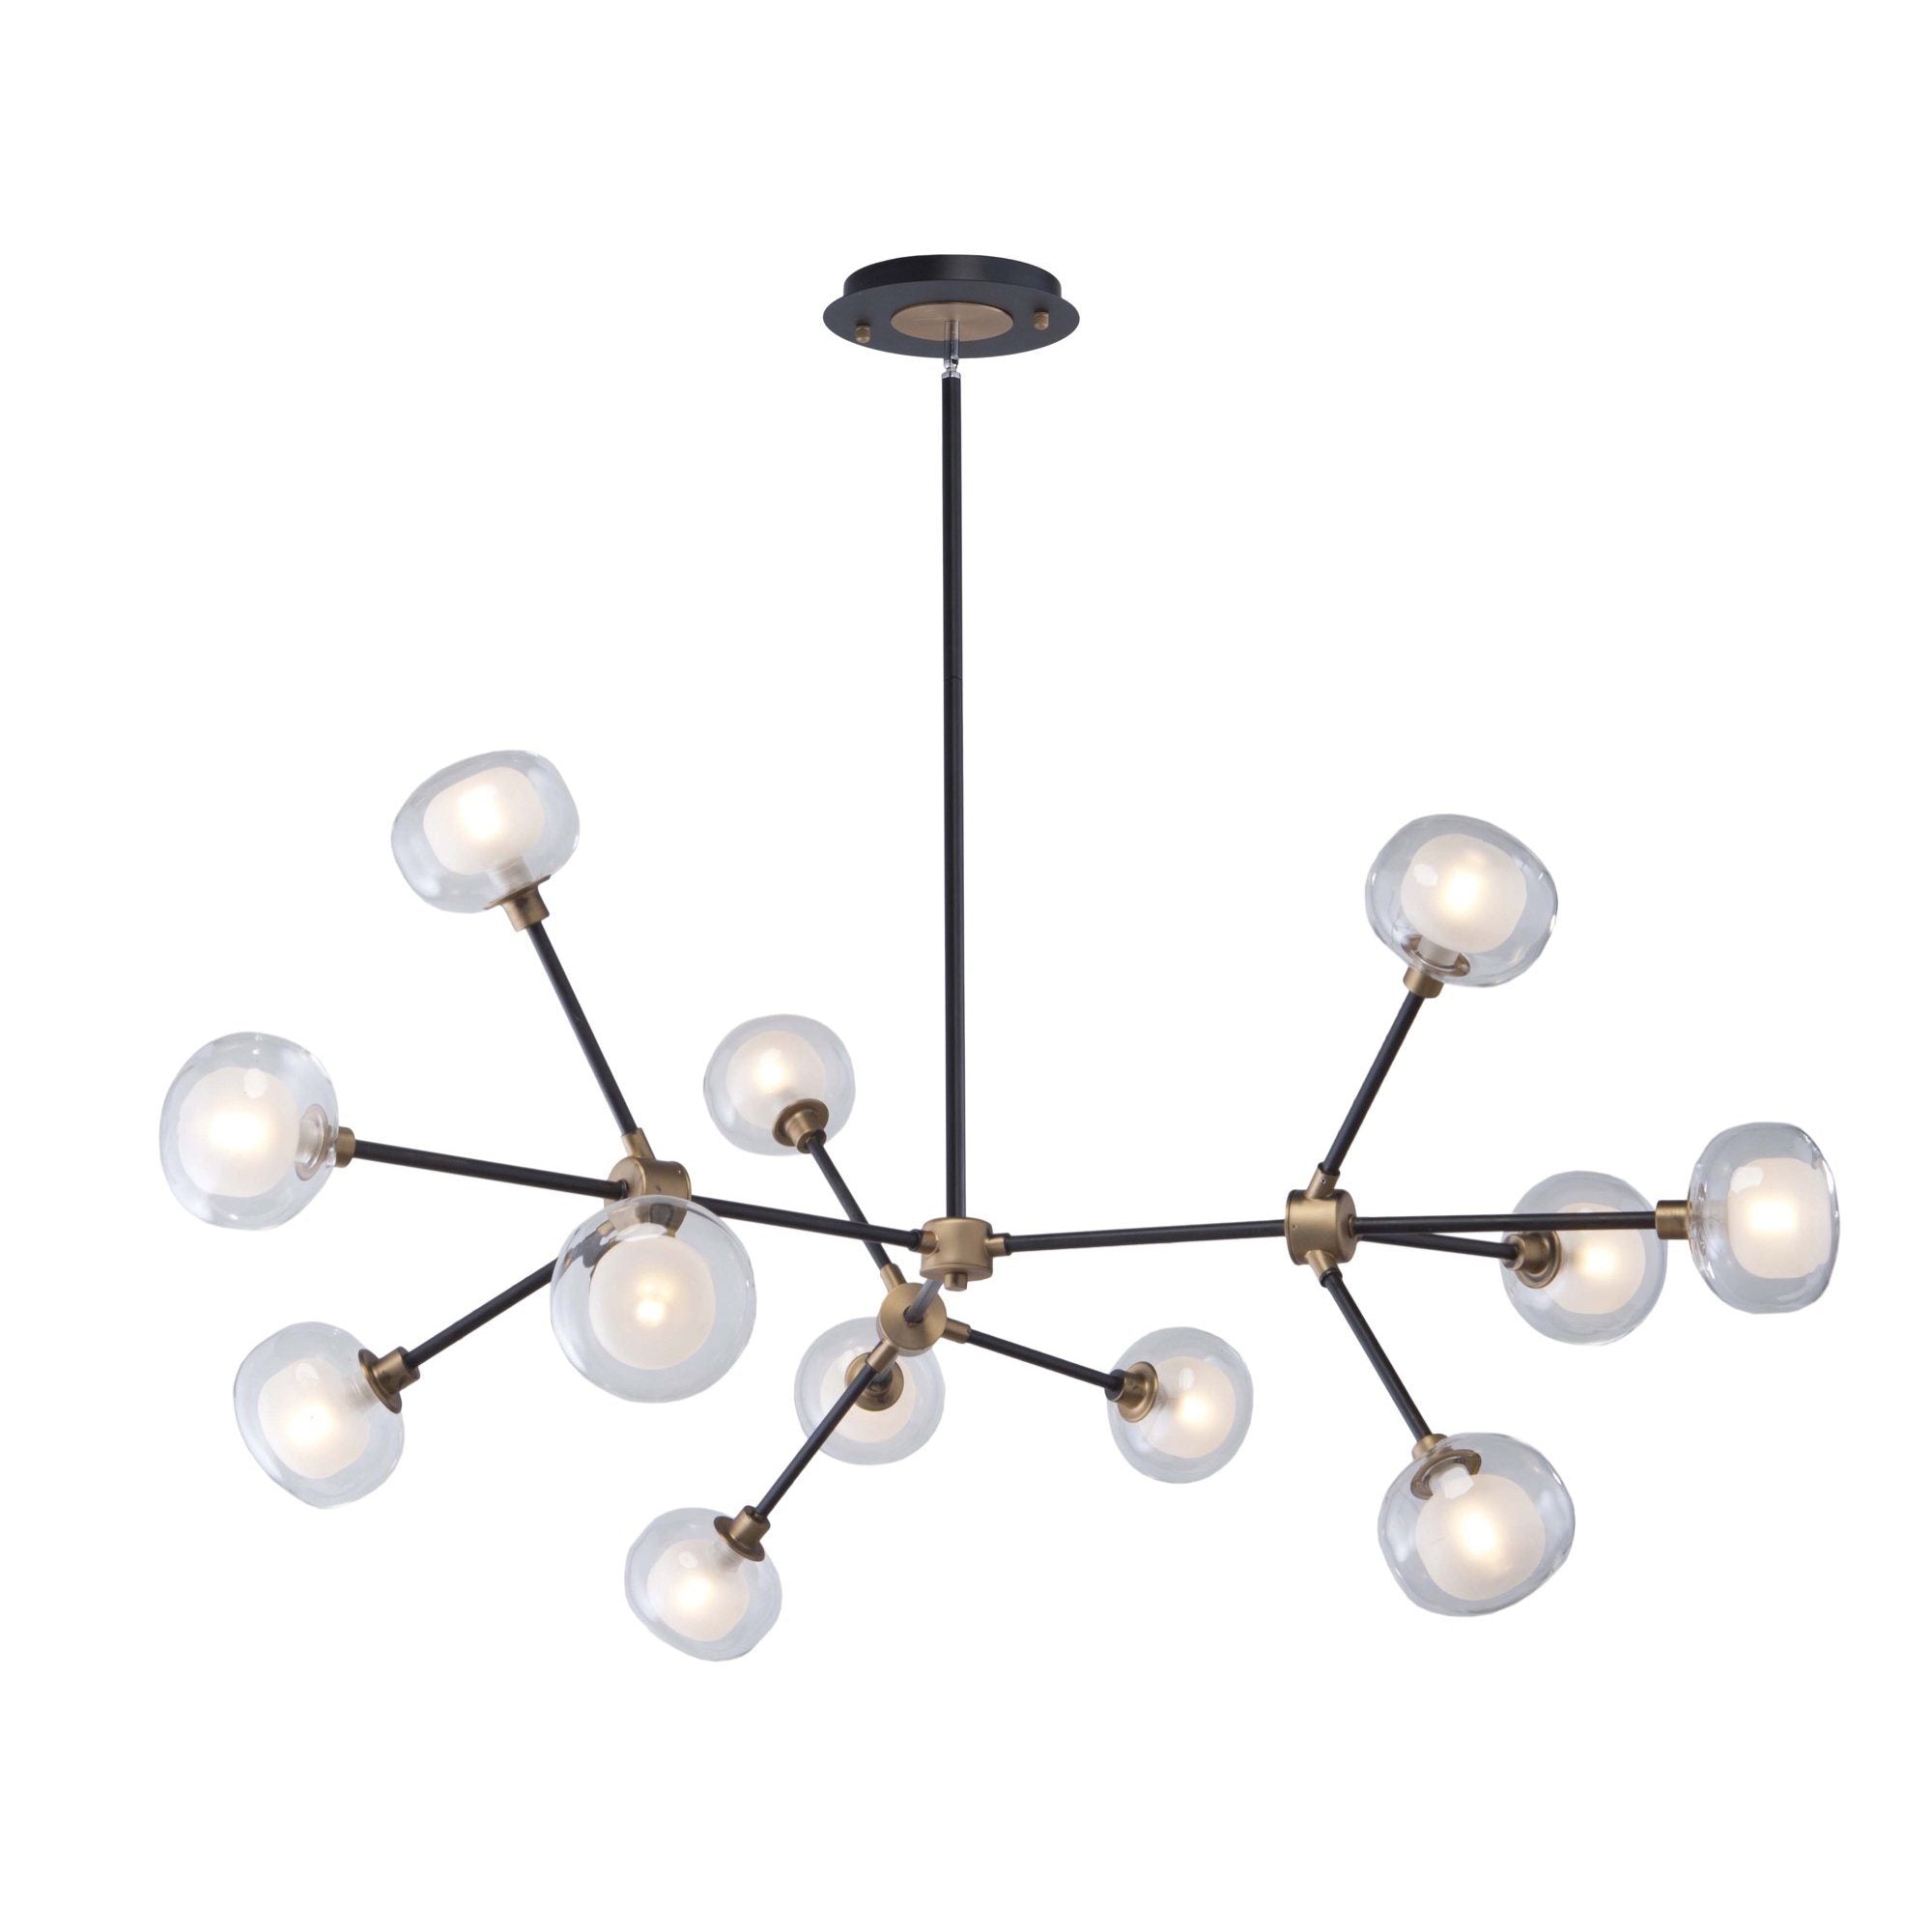 Grappolo 47.25 in. wide Black and Vintage Gold Chandelier Ceiling Artcraft 